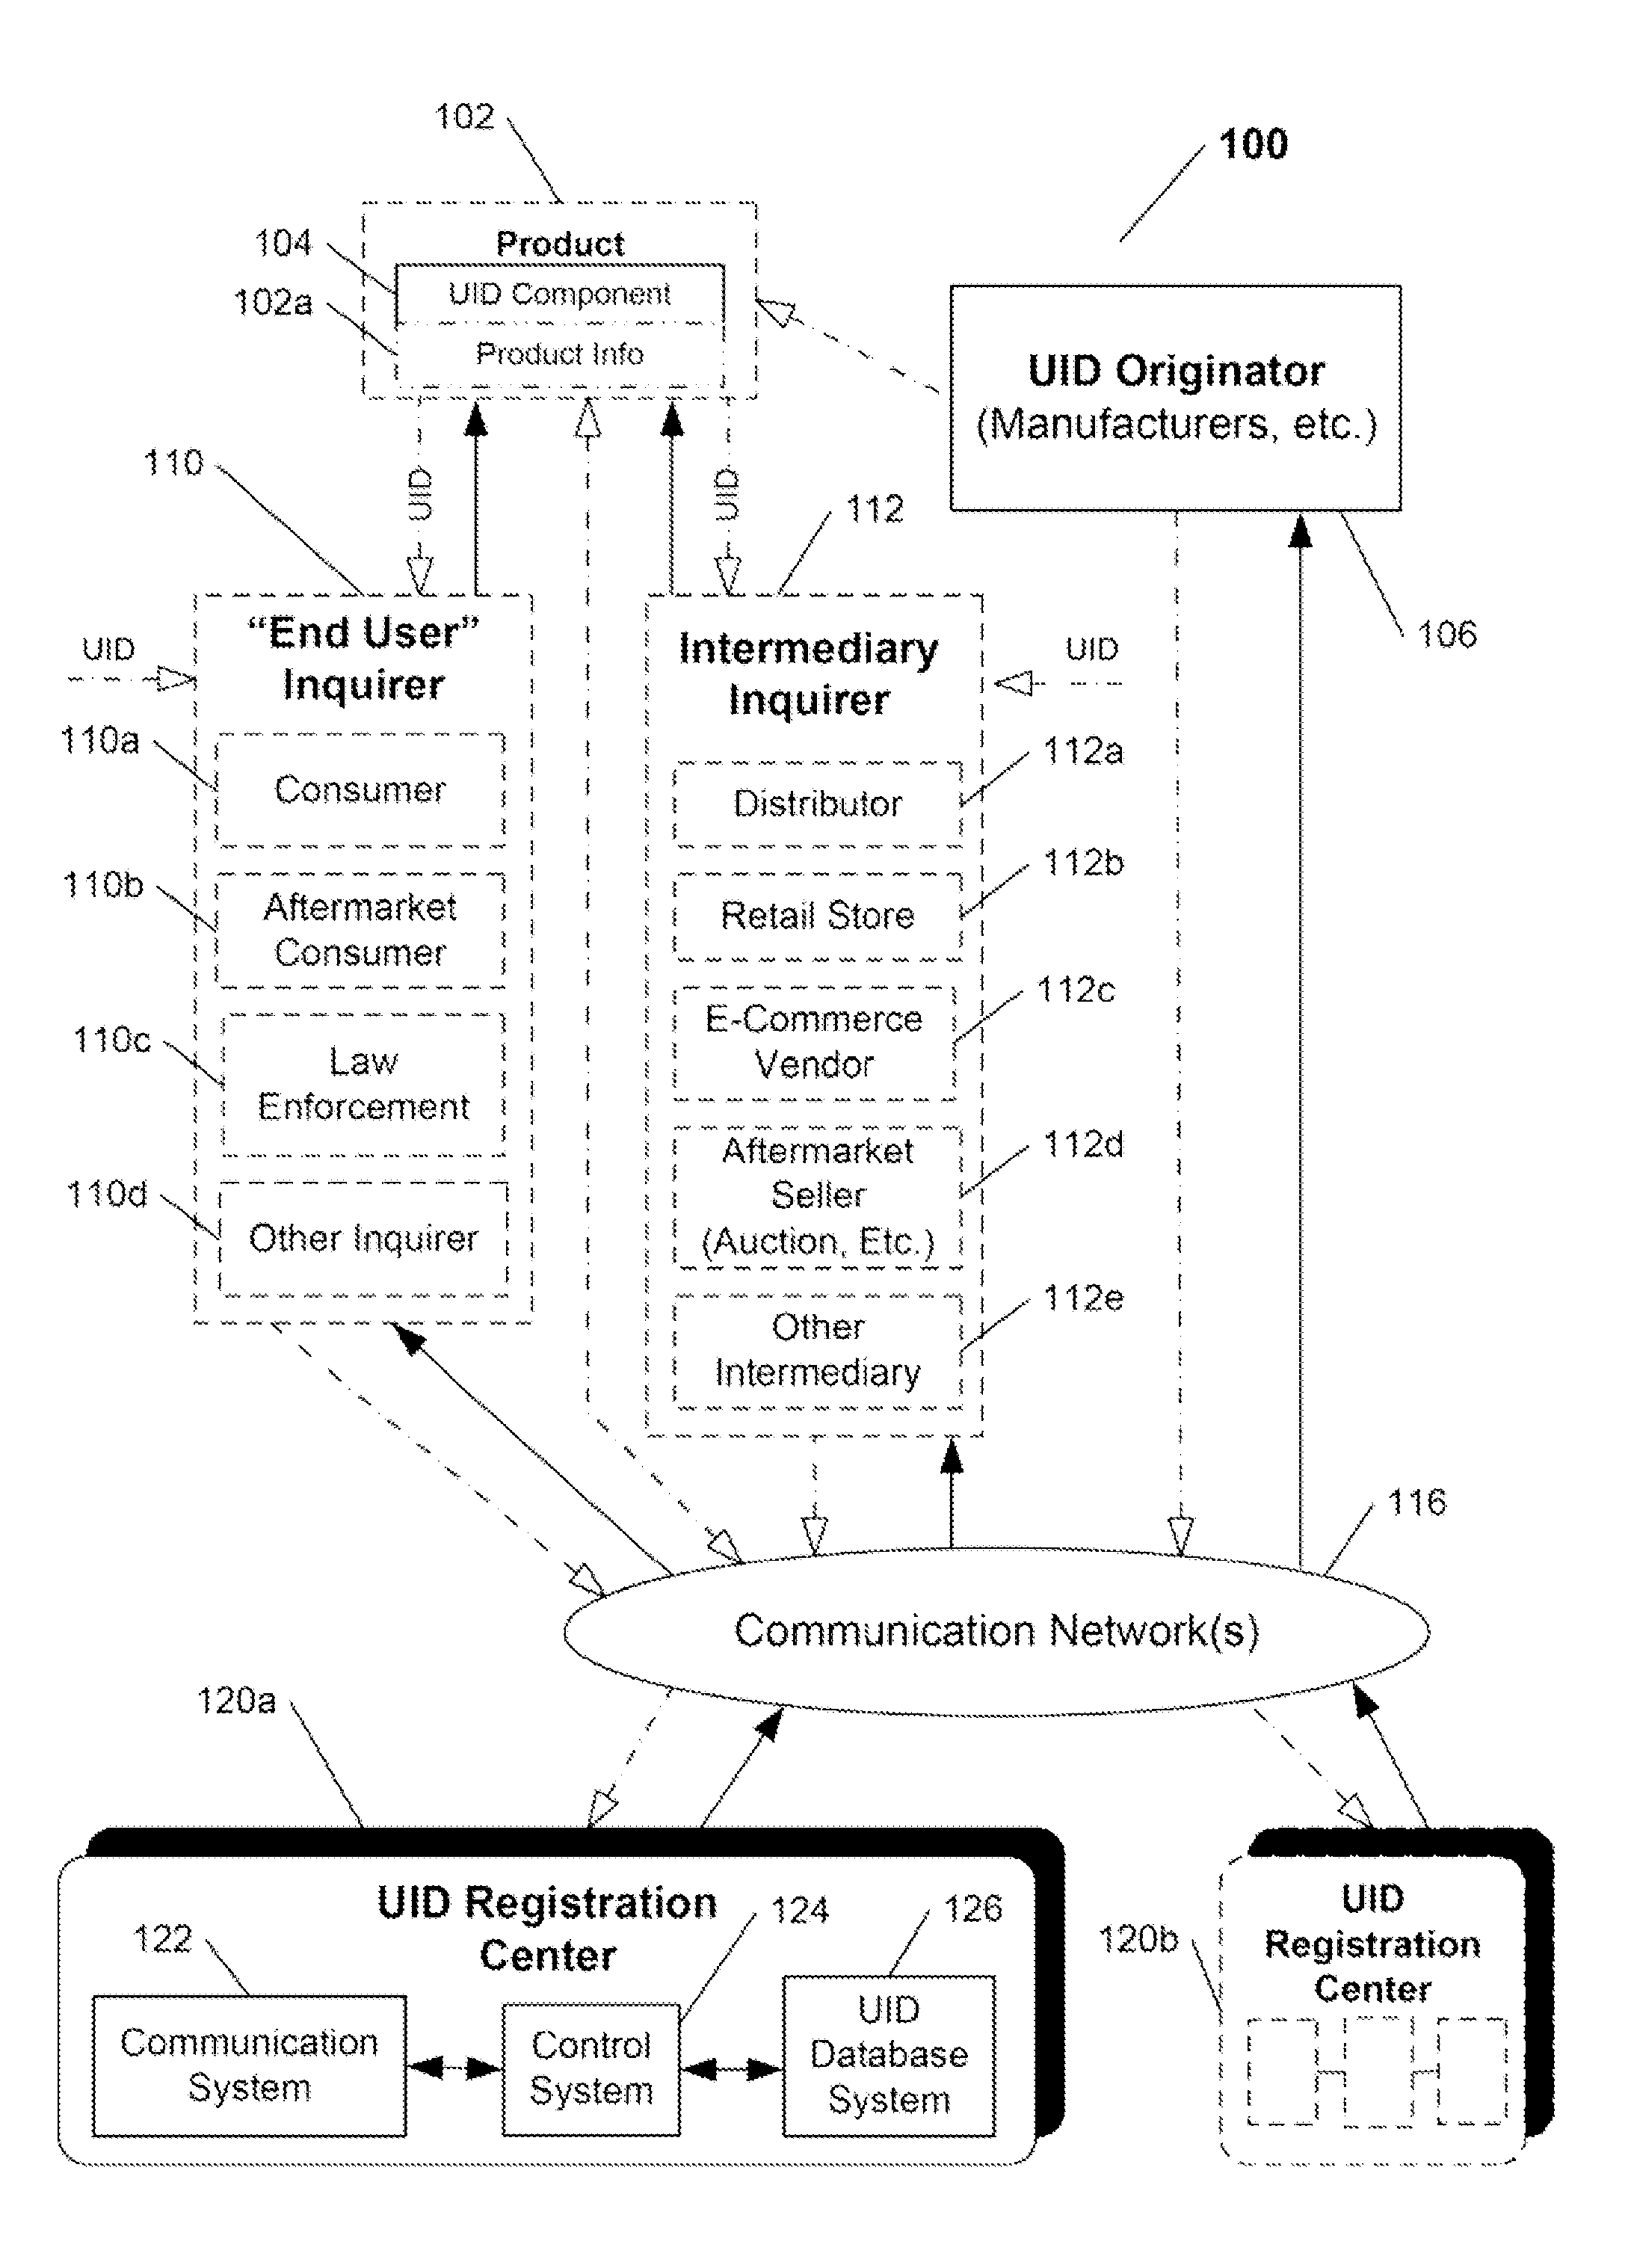 System and method for streamlined registration of products over a communication network and for verification and management of information related thereto